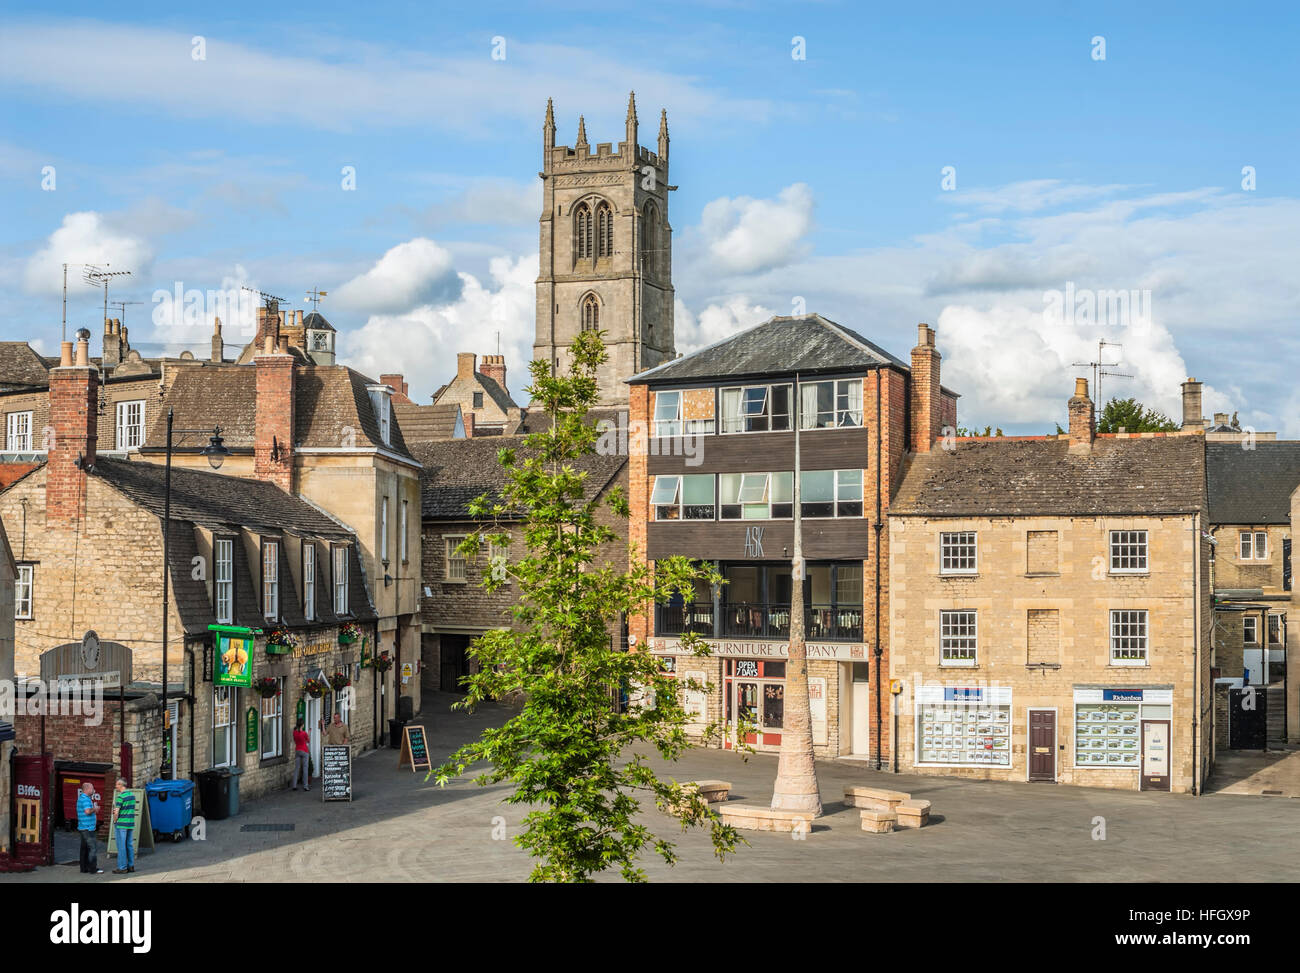 Historical old town of Stamford, an ancient town located approximately 100 miles to the north of London, England. Stock Photo